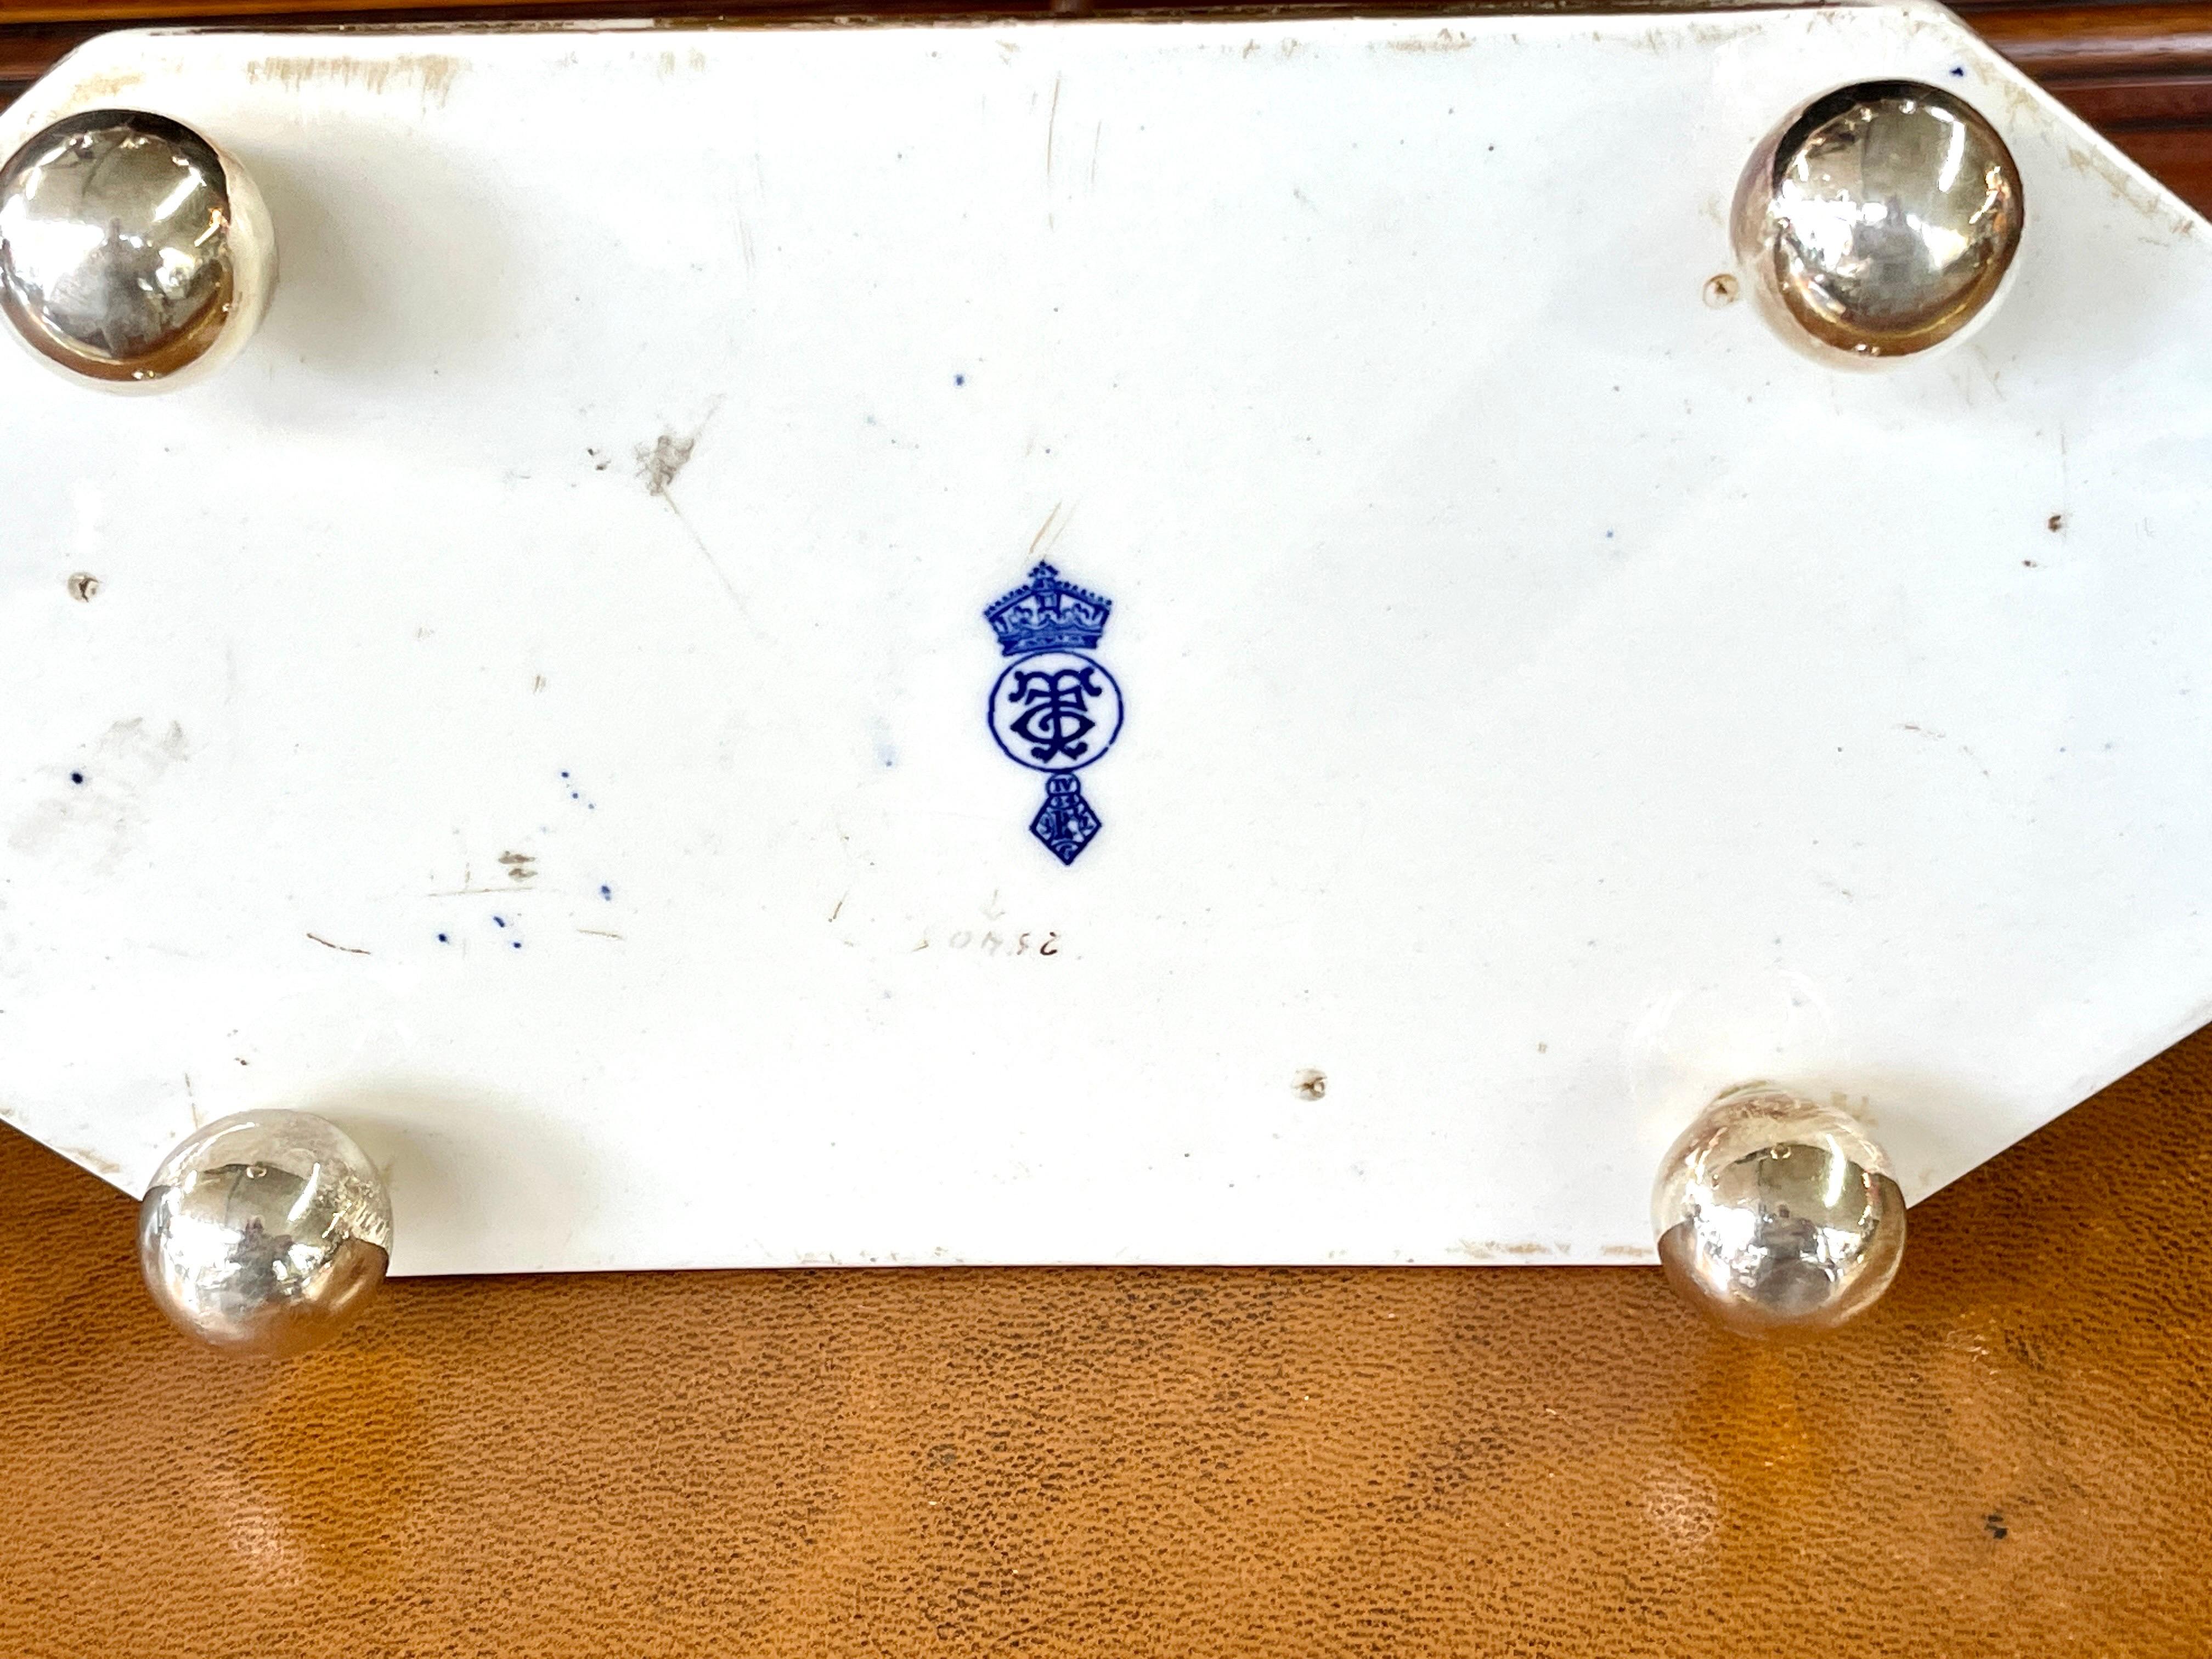 Extraordinarily rare and fine Antique English Sheffield silver plate and hand painted porcelain Toast or Letter Rack in the imari decor. The plating is in pristine, age-appropriate condition. Toast racks, typically in silver or silver plate, are a